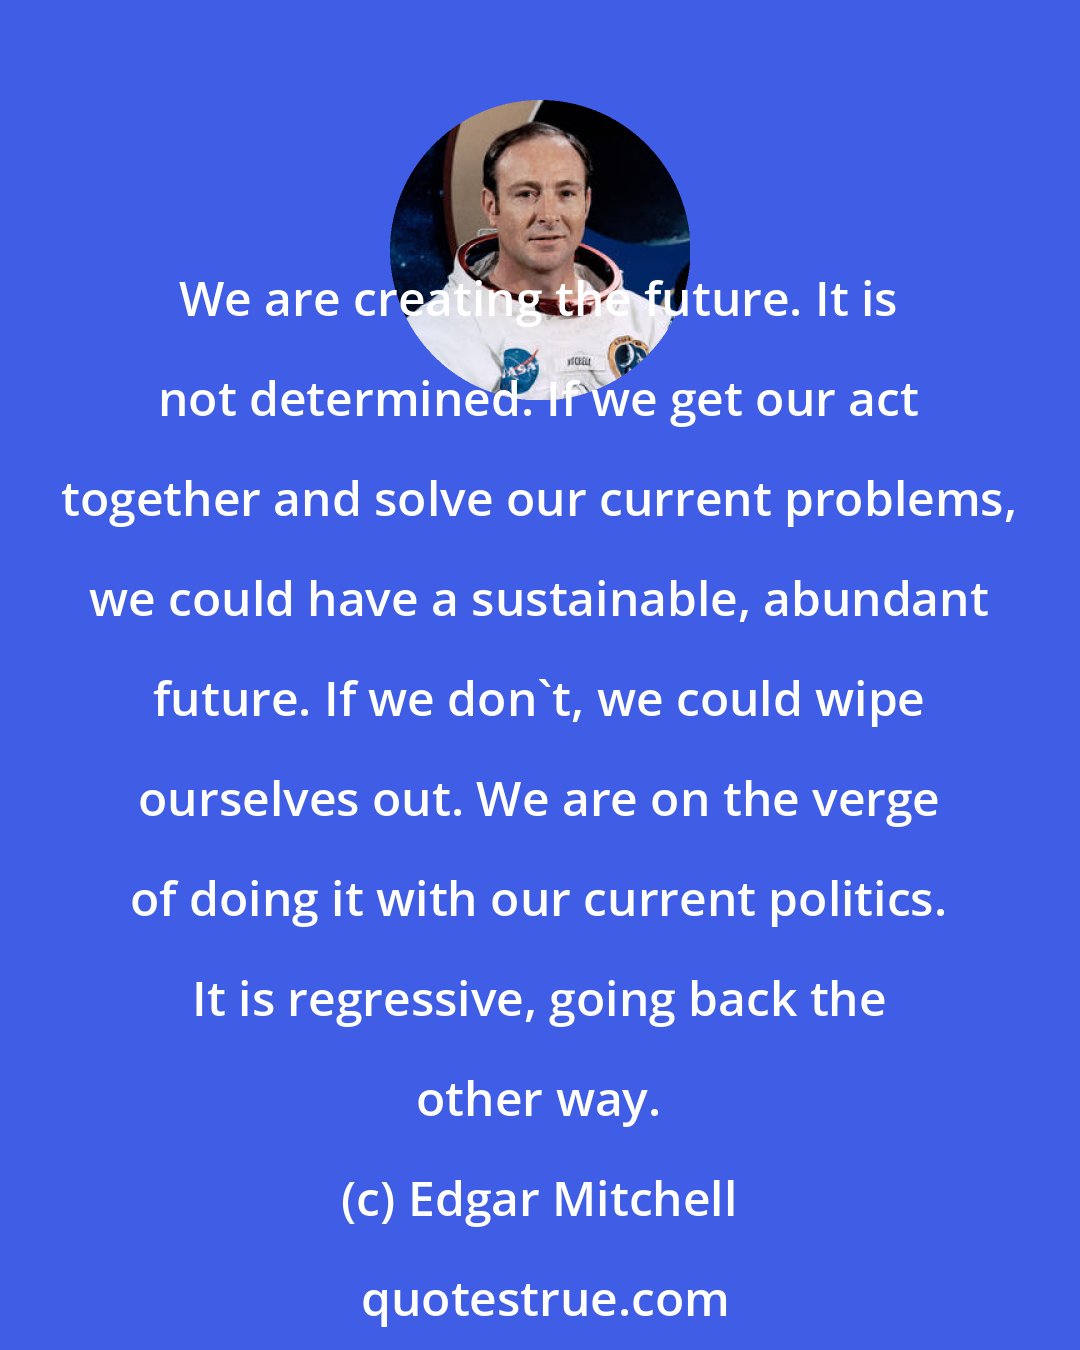 Edgar Mitchell: We are creating the future. It is not determined. If we get our act together and solve our current problems, we could have a sustainable, abundant future. If we don't, we could wipe ourselves out. We are on the verge of doing it with our current politics. It is regressive, going back the other way.